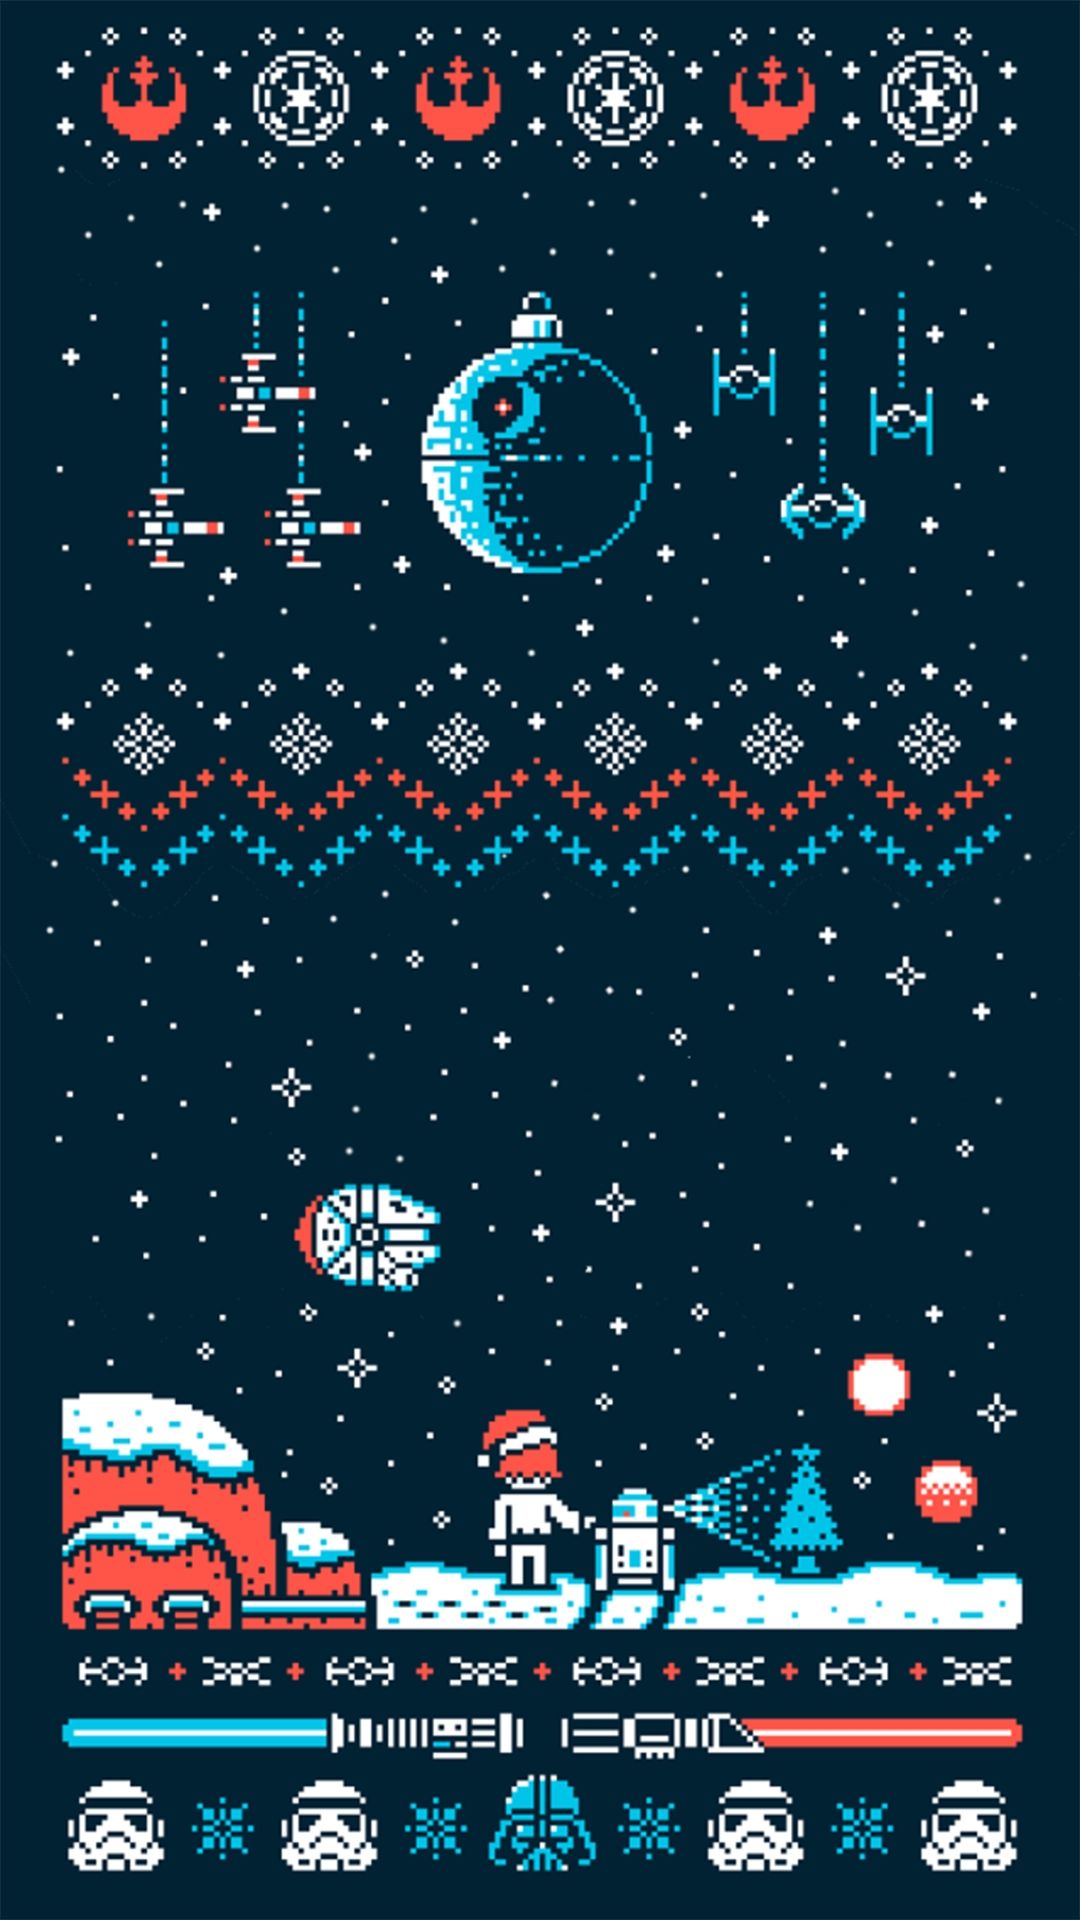 Star Wars Christmas Wallpapers 1920X1080 / We hope you enjoy our